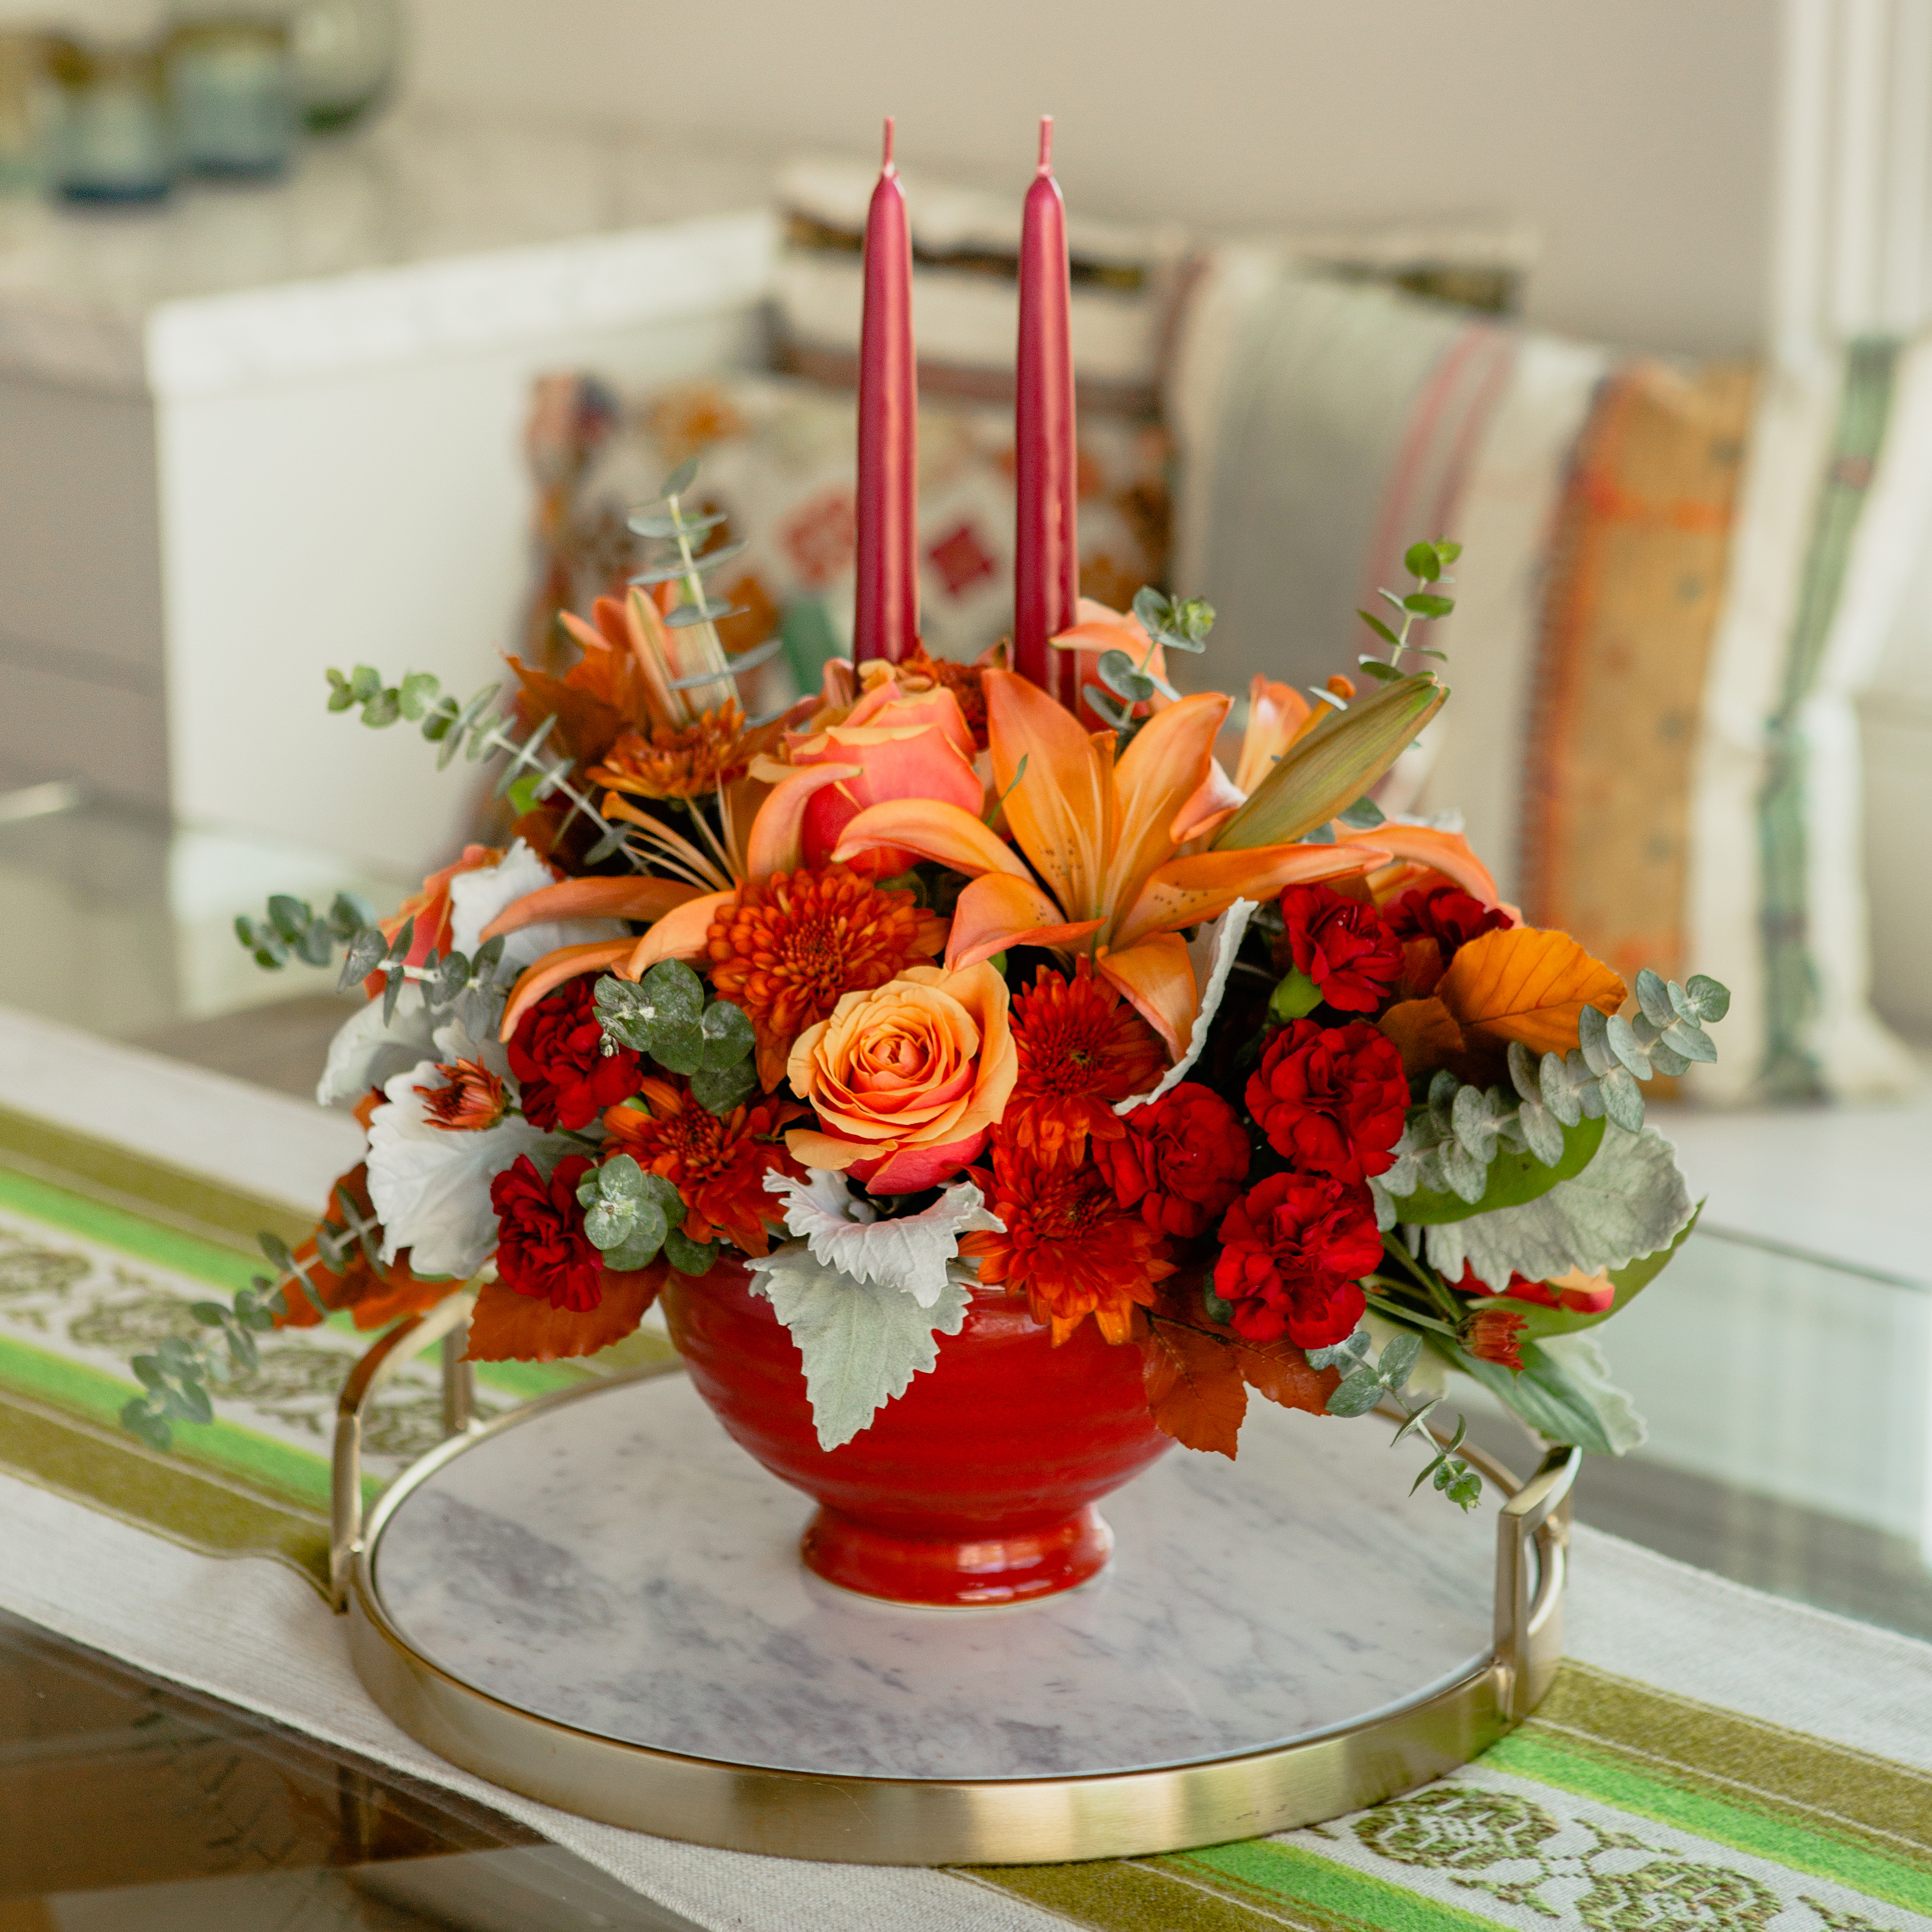 Orange lilies, orange roses, maroon carnations, and more fill an orange thanksgiving centerpiece